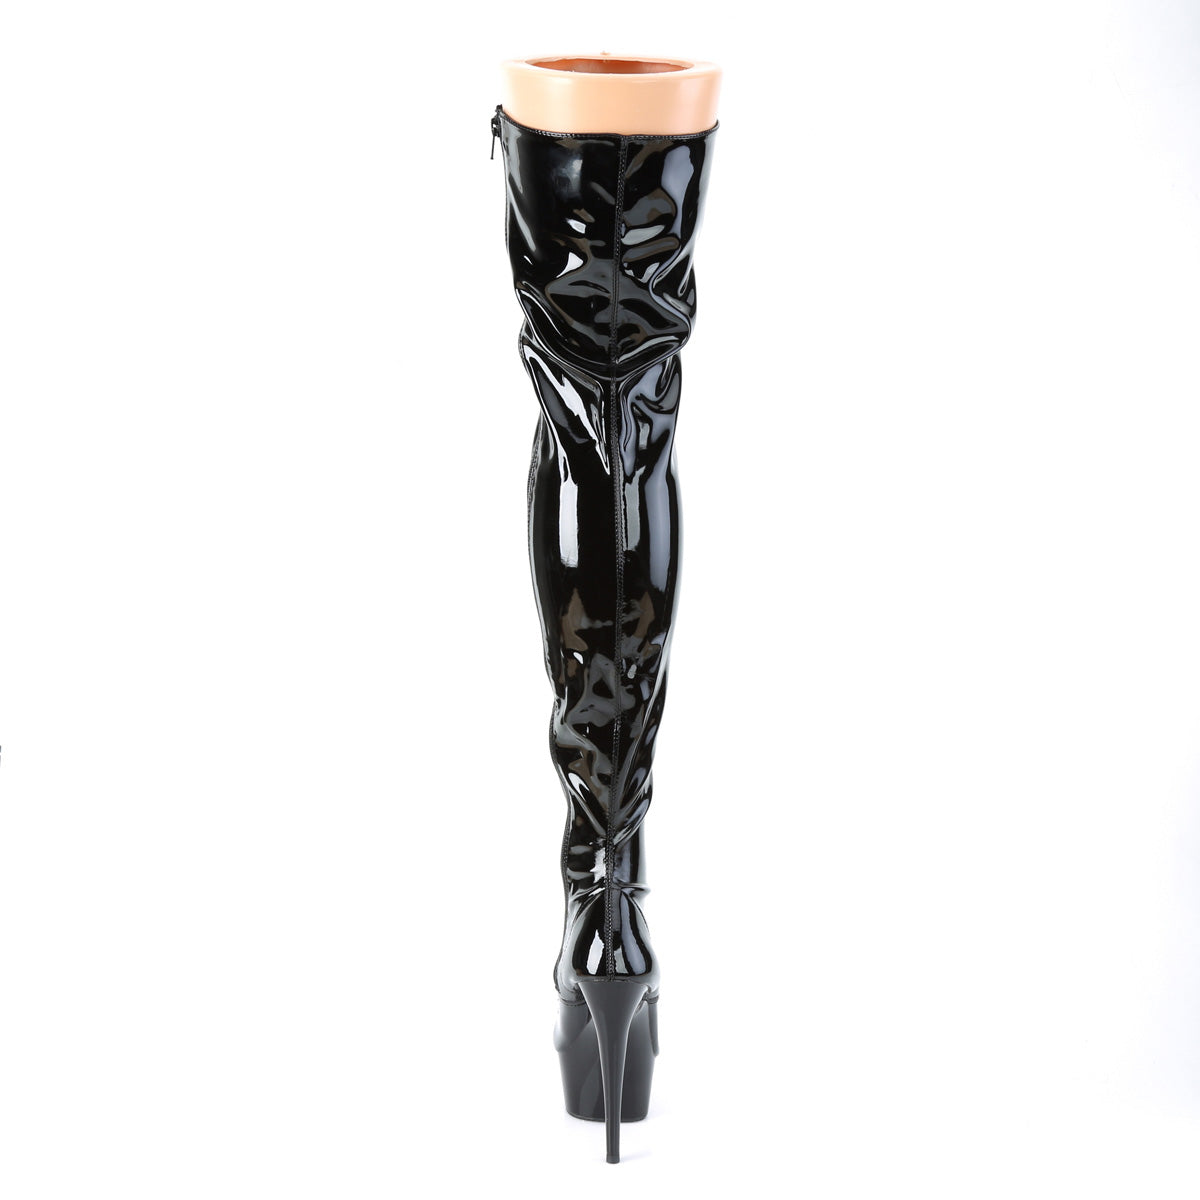 DELIGHT-3023 6" Heel Black Stretch Patent Pole Dancer Boots-Pleaser- Sexy Shoes Fetish Footwear